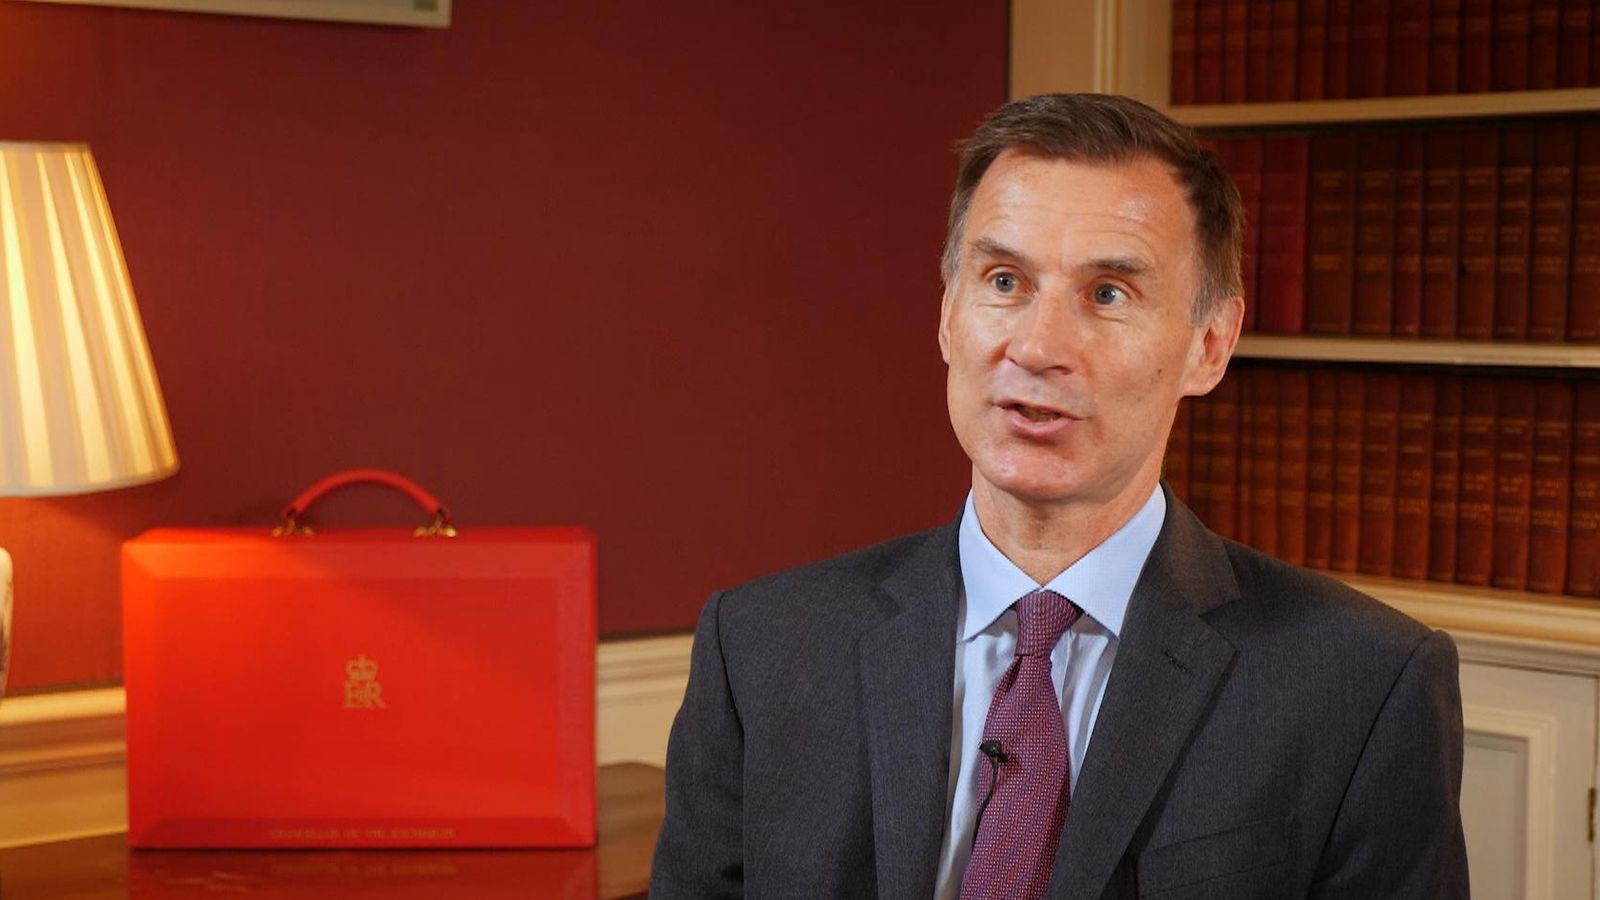 Chancellor says UK determined to compete for green investment as battery announcement awaited